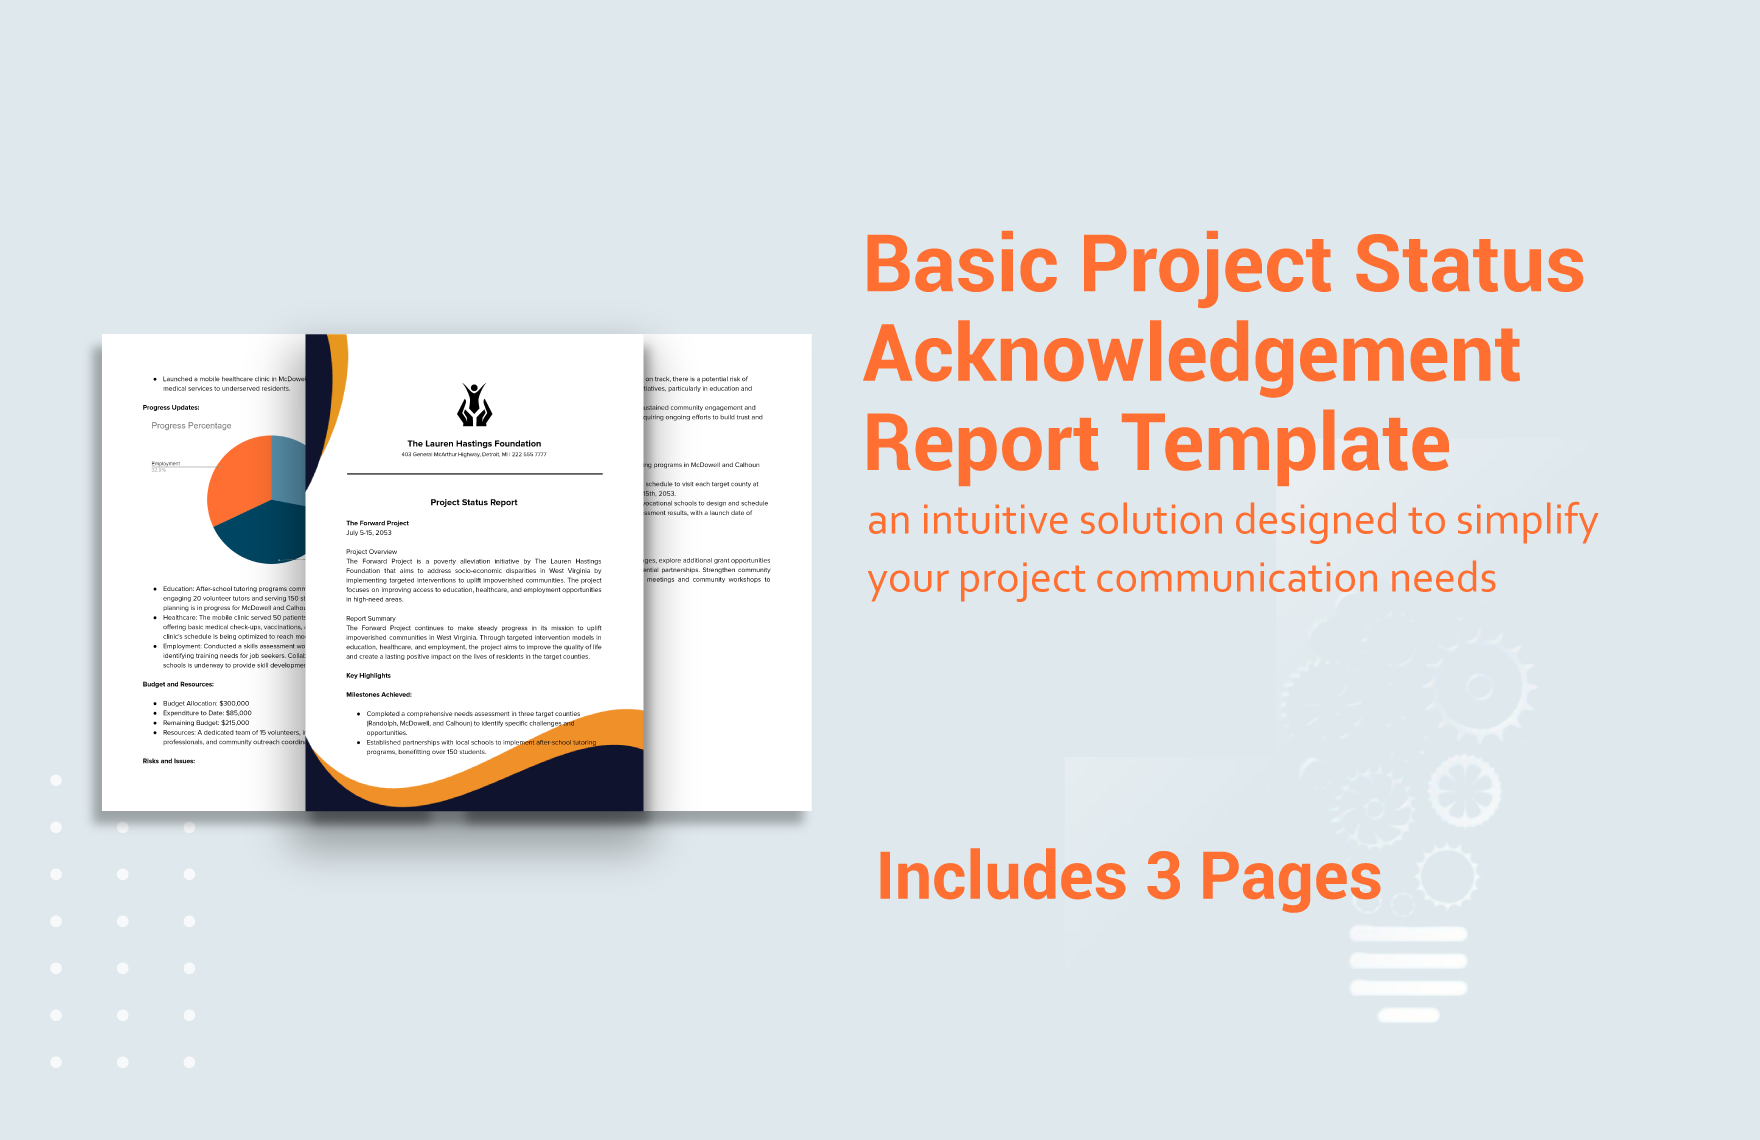 Basic Project Status Acknowledgement Report Template